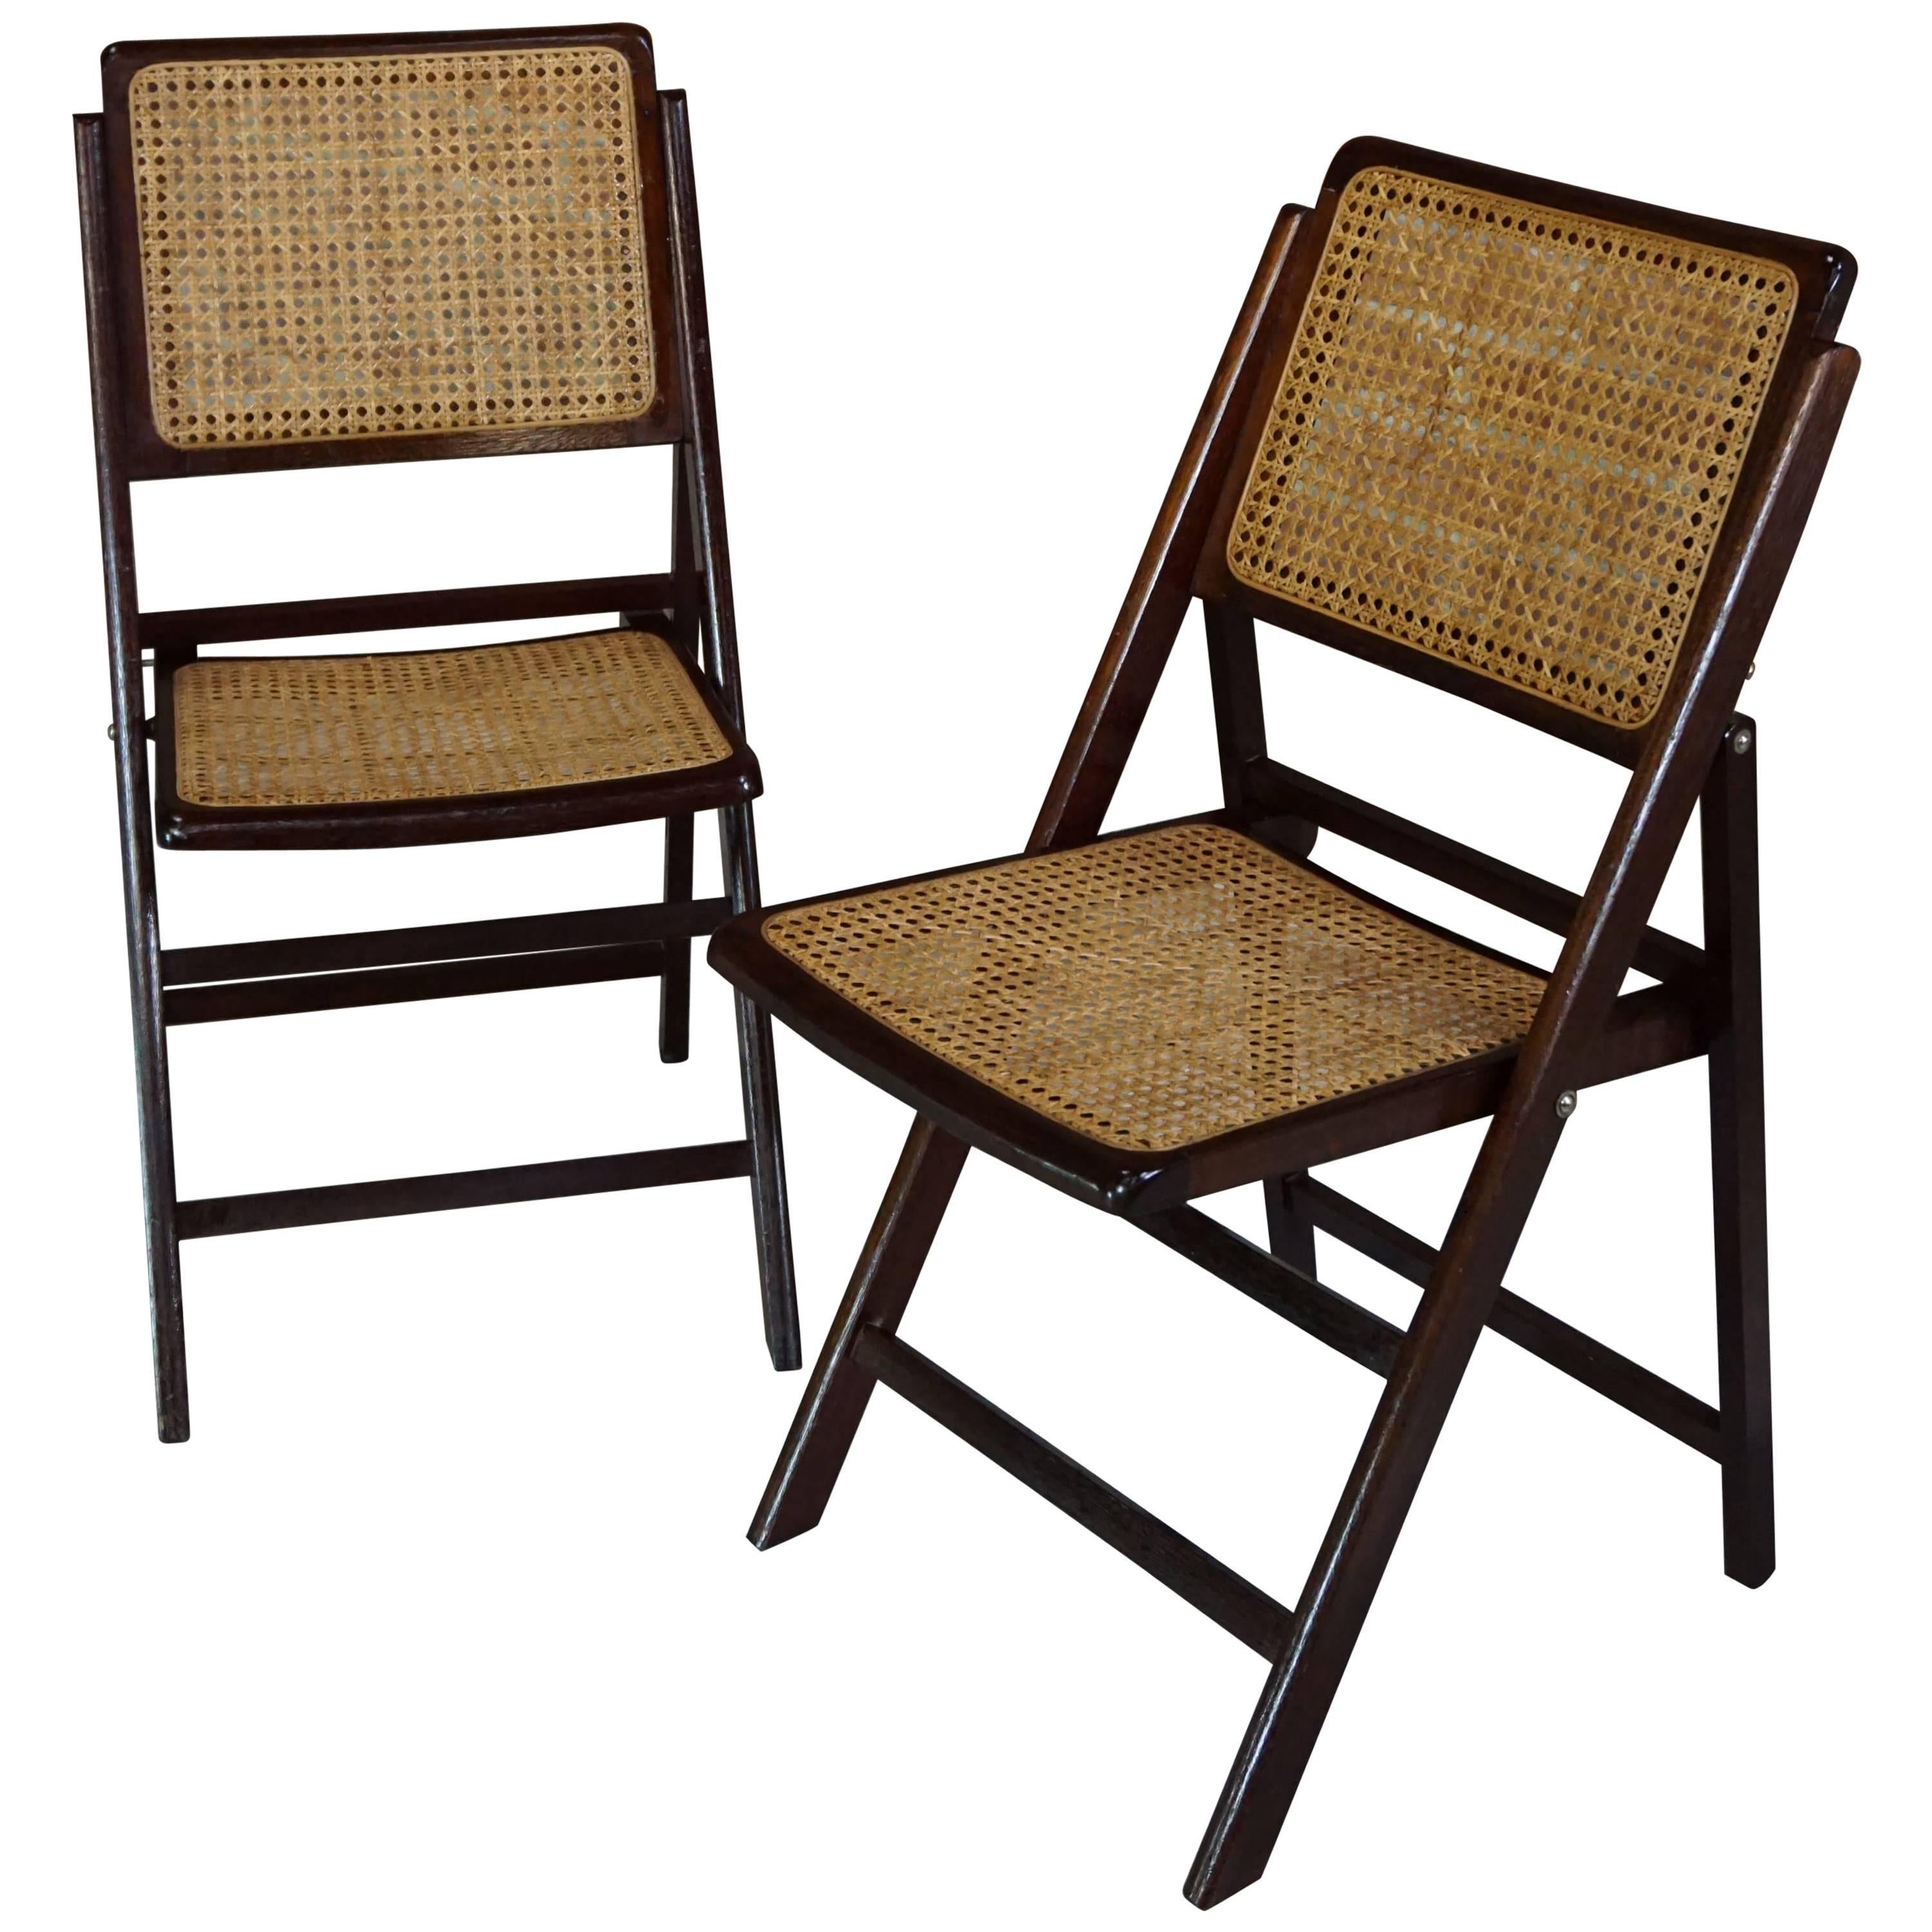 Pair of Folding Wood and Wickers Chairs Design of the 1960s